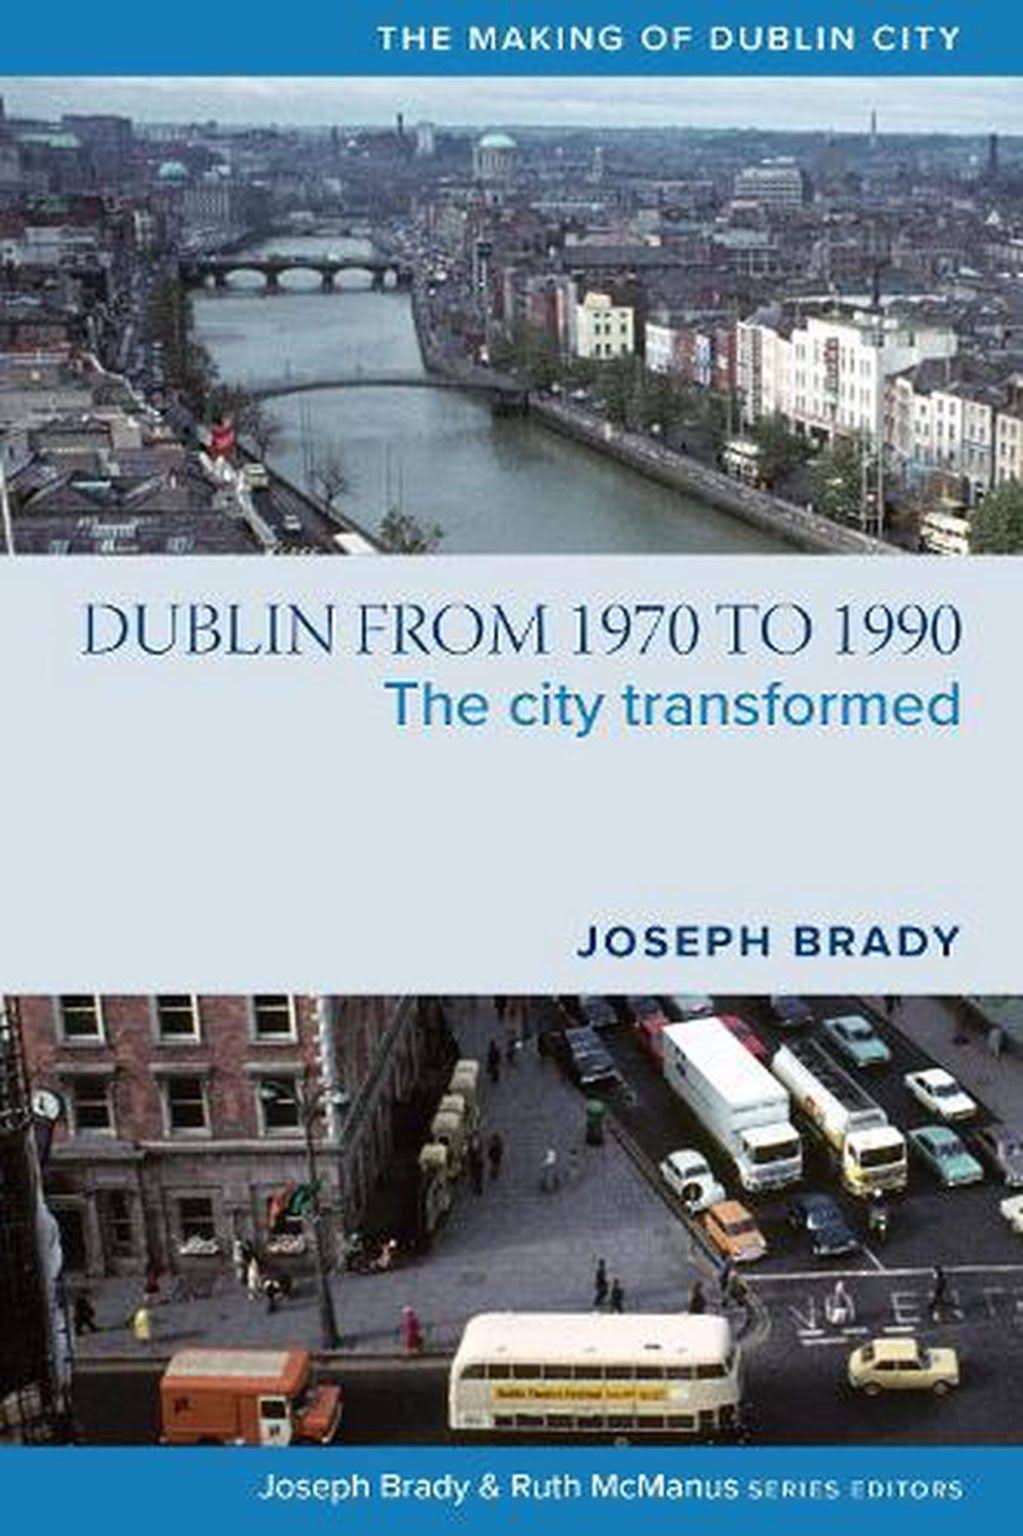 Dublin from 1970 to 1990: The City Transformed [Book]